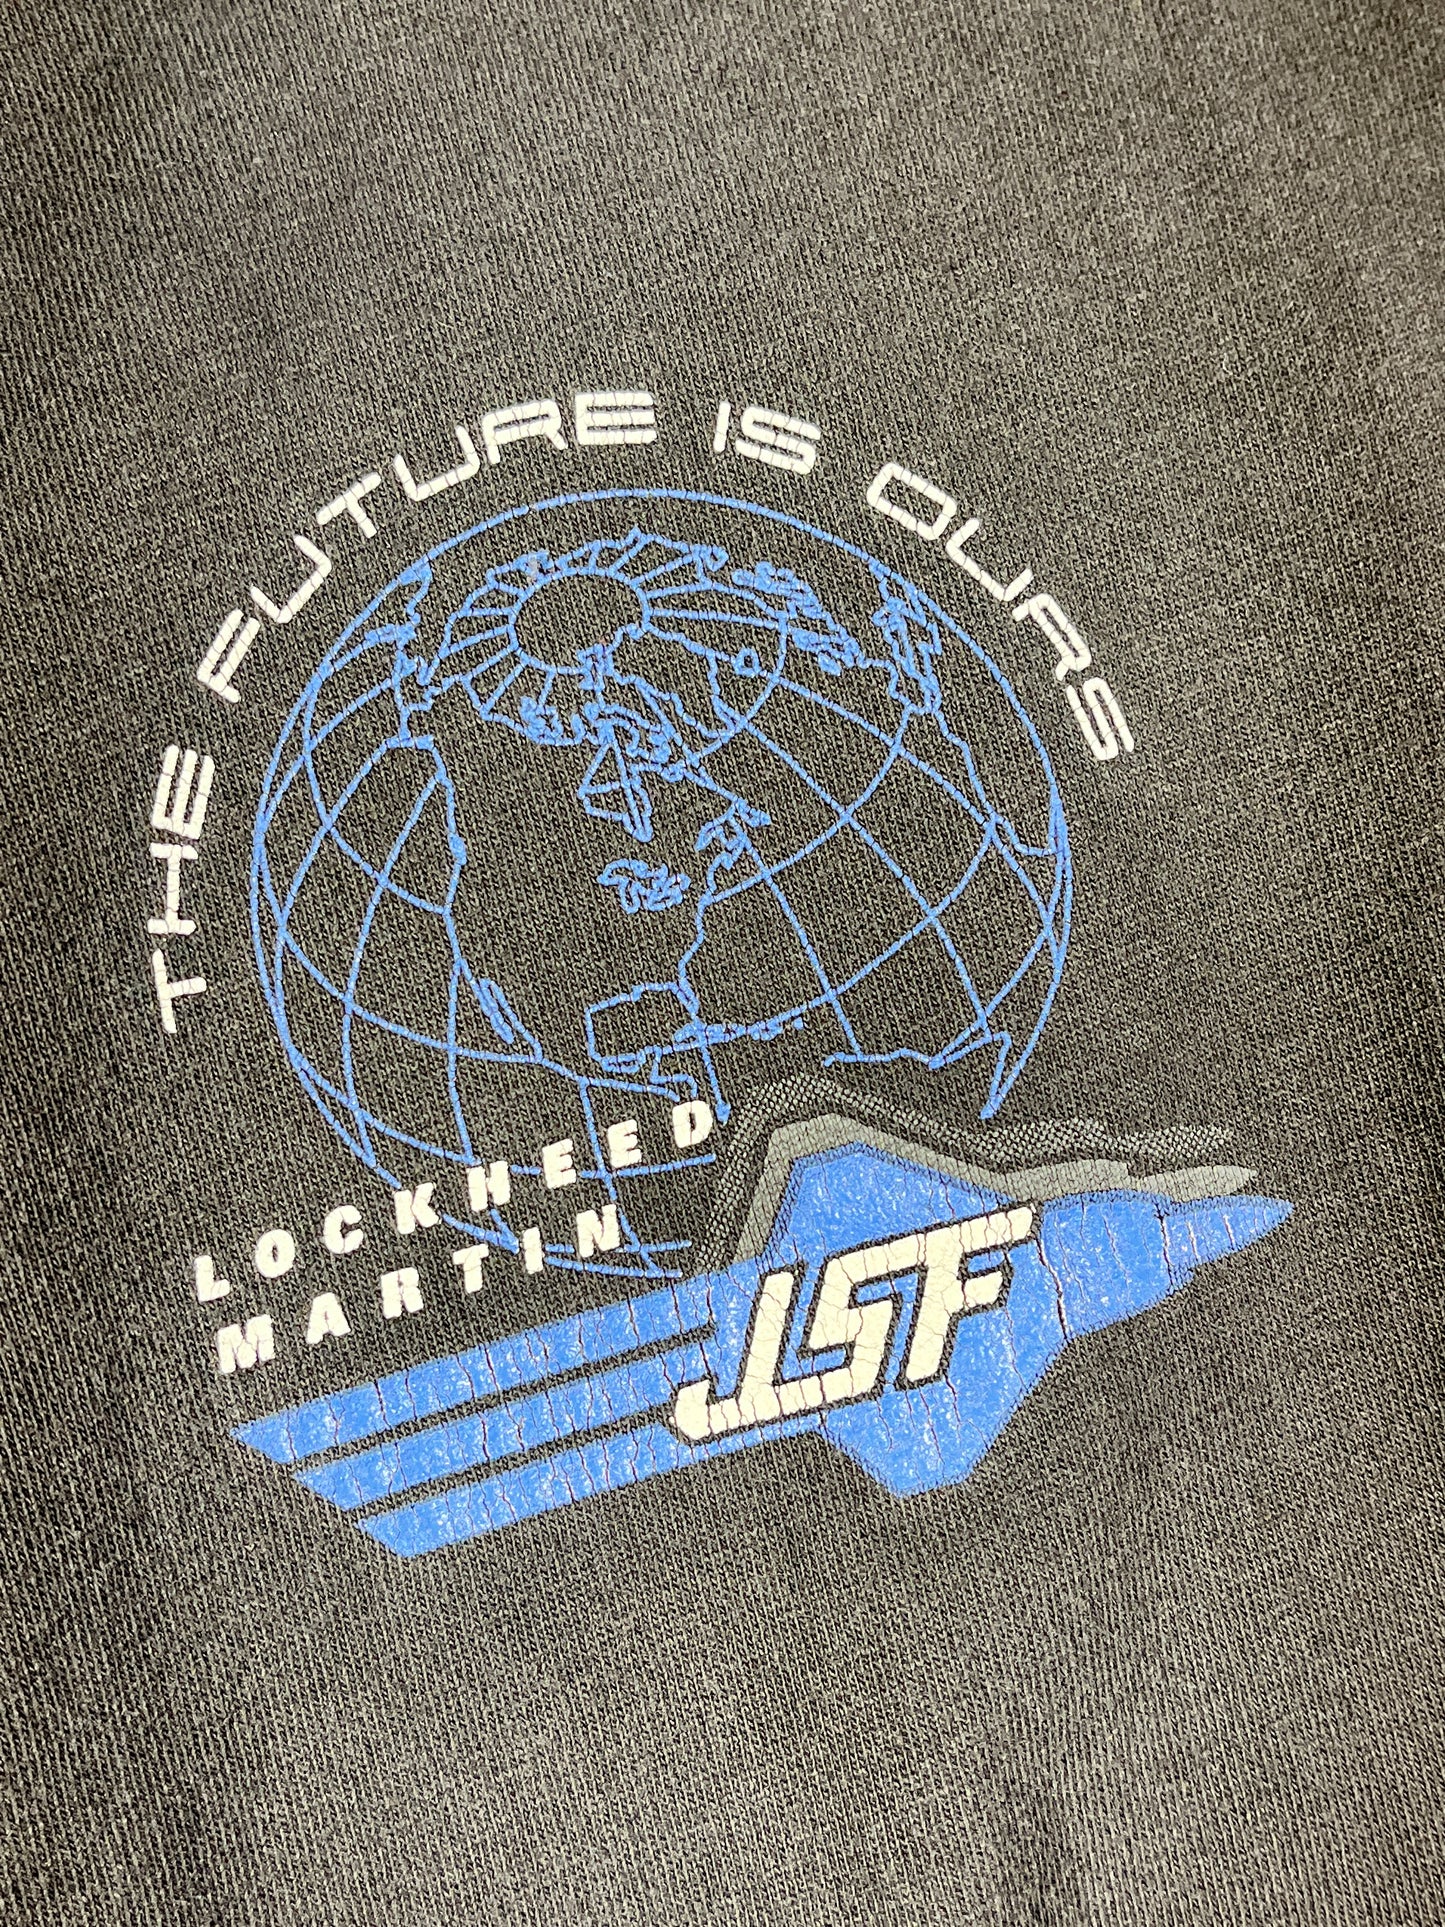 Vintage Fighter Jet T-Shirt Future is OURS Lockheed Martin X-35